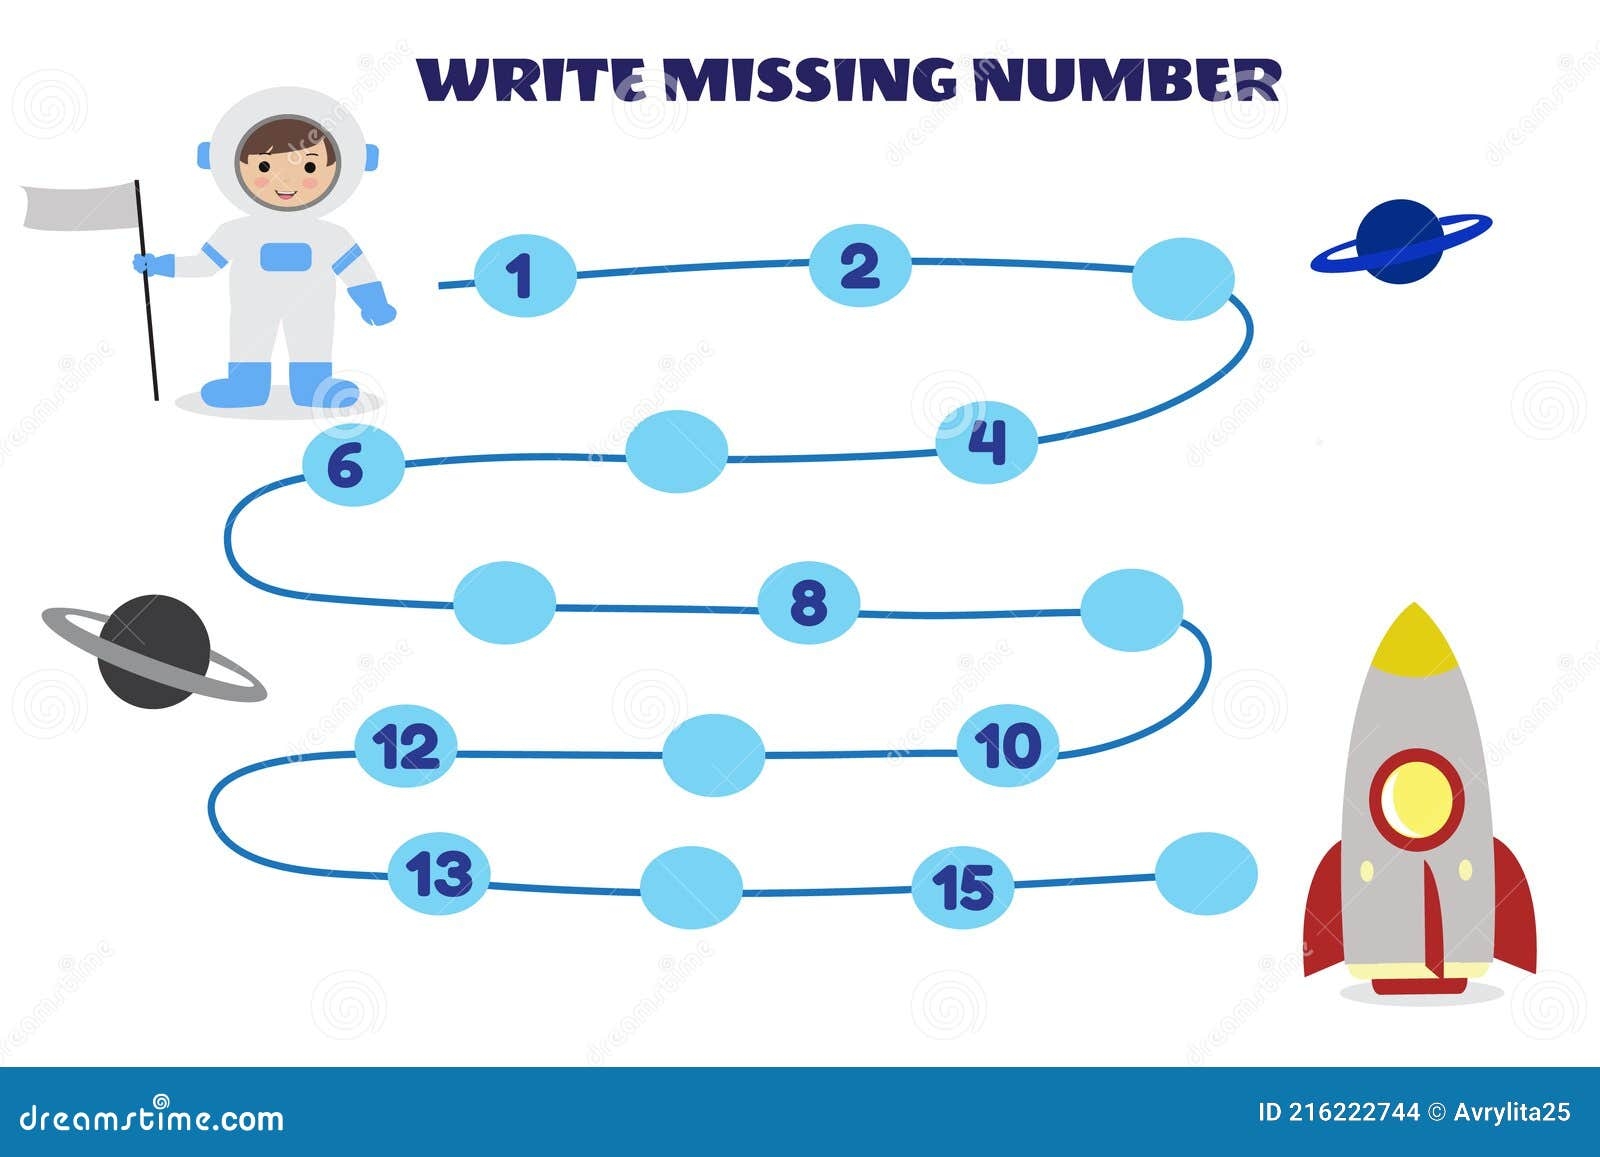 Write Missing Number Math Game For Kid Help The Astronaut Find Road To Spaceship Stock Vector Illustration Of Number Preschool 216222744